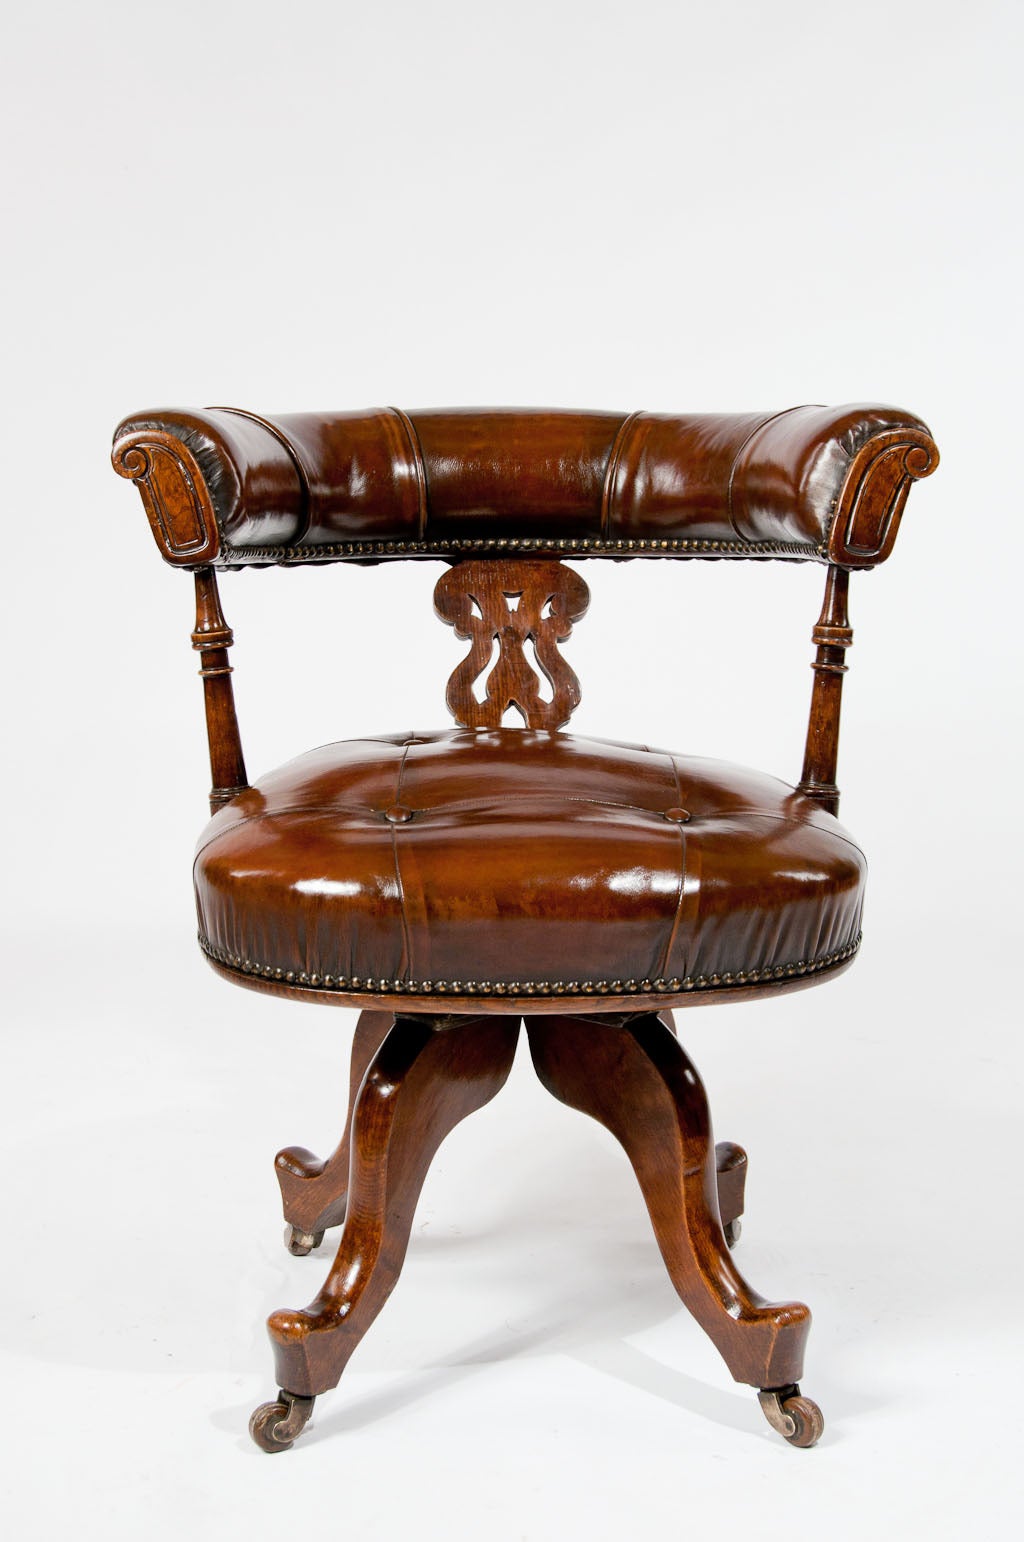 British Victorian Leather Upholstered Desk Chair